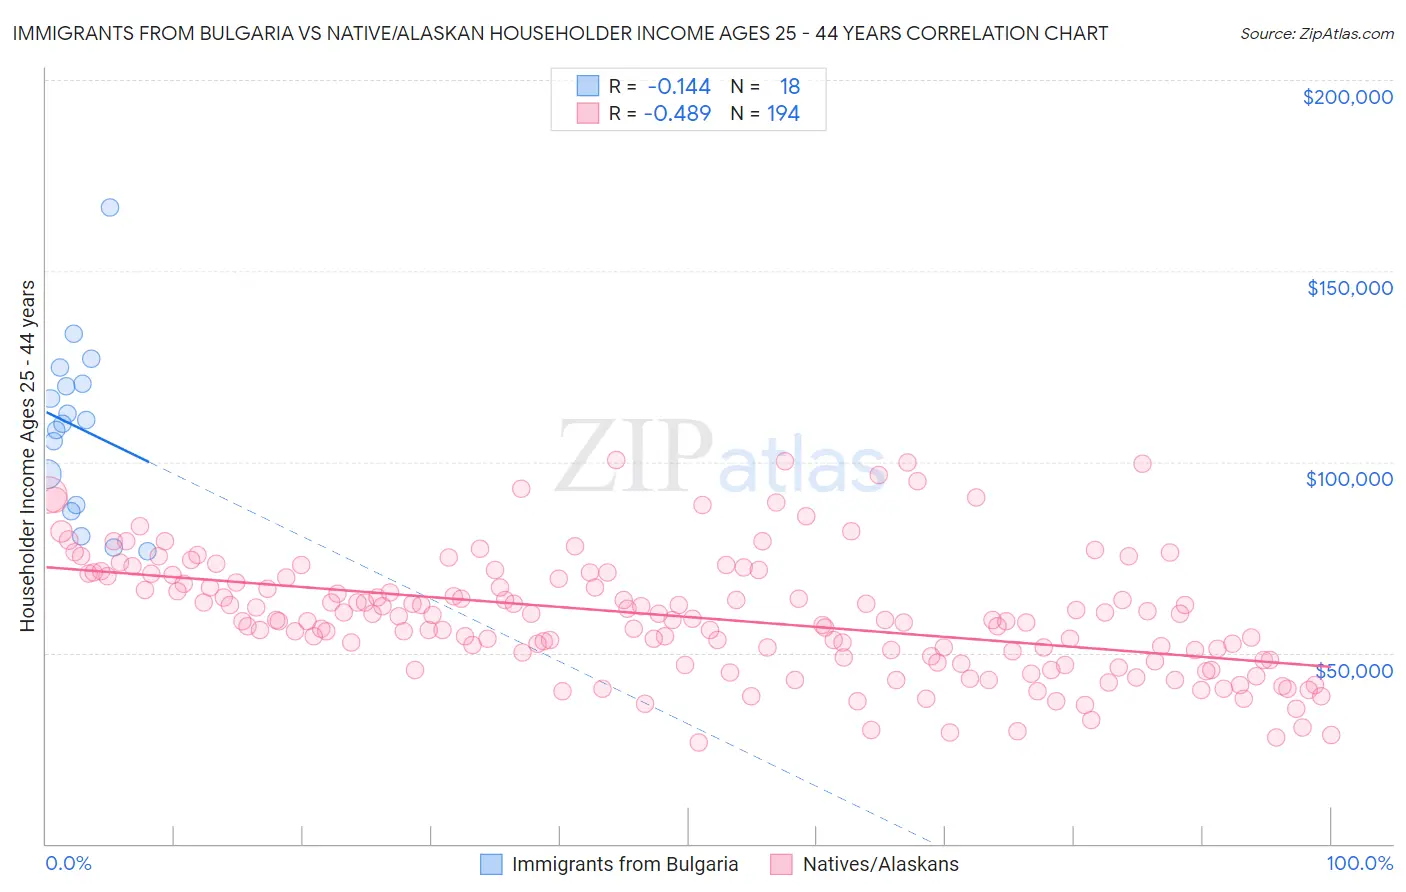 Immigrants from Bulgaria vs Native/Alaskan Householder Income Ages 25 - 44 years